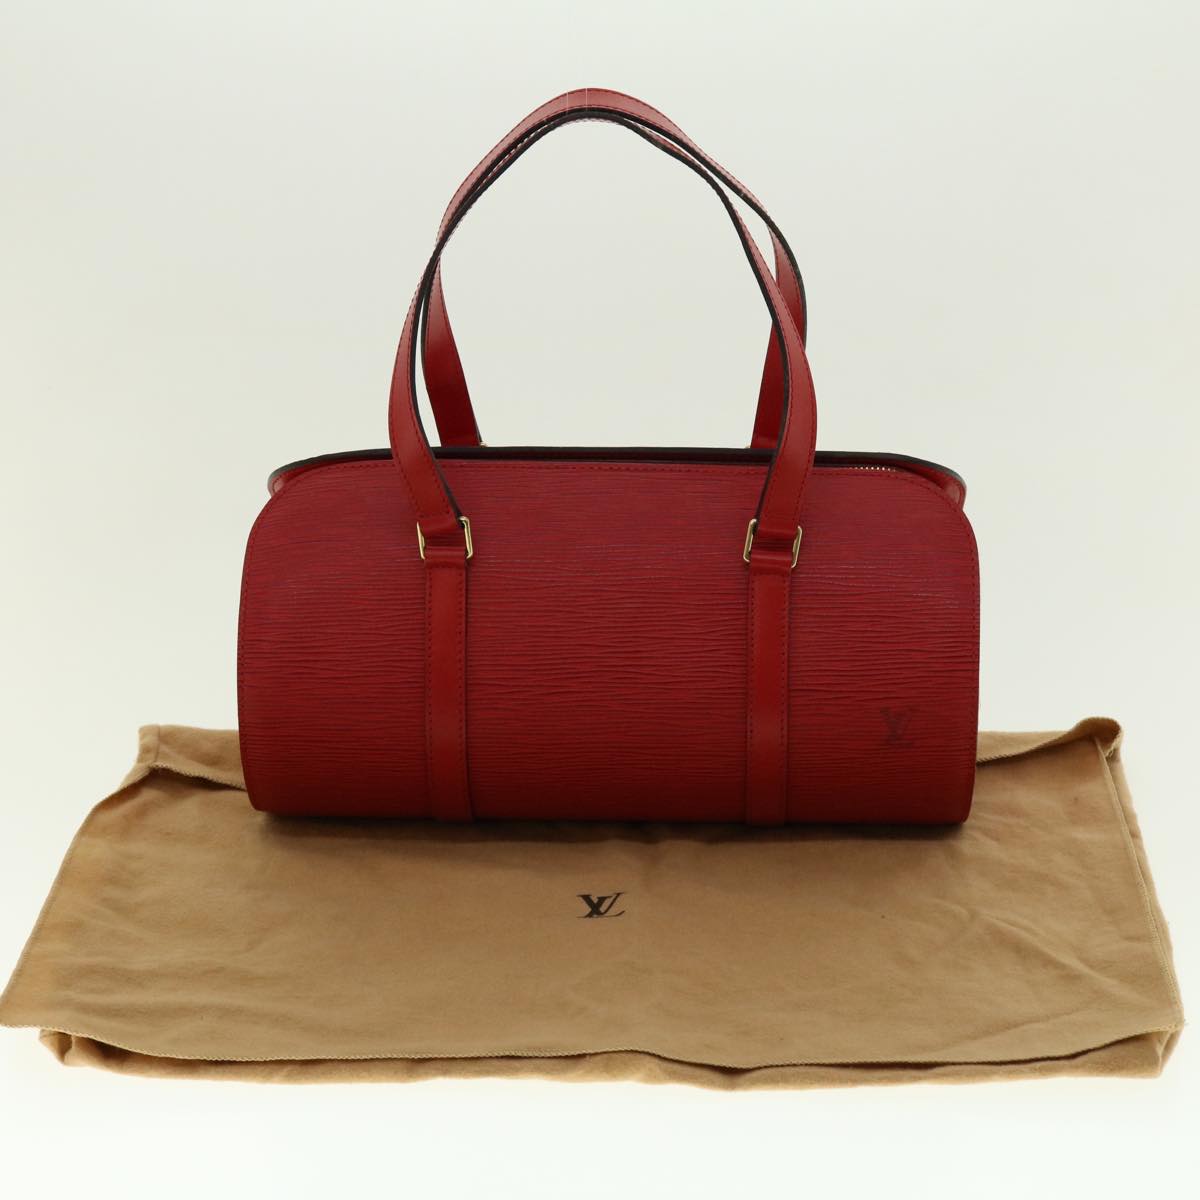 LOUIS VUITTON M52227 Epi Soufflot Hand Bag Red Leather Used